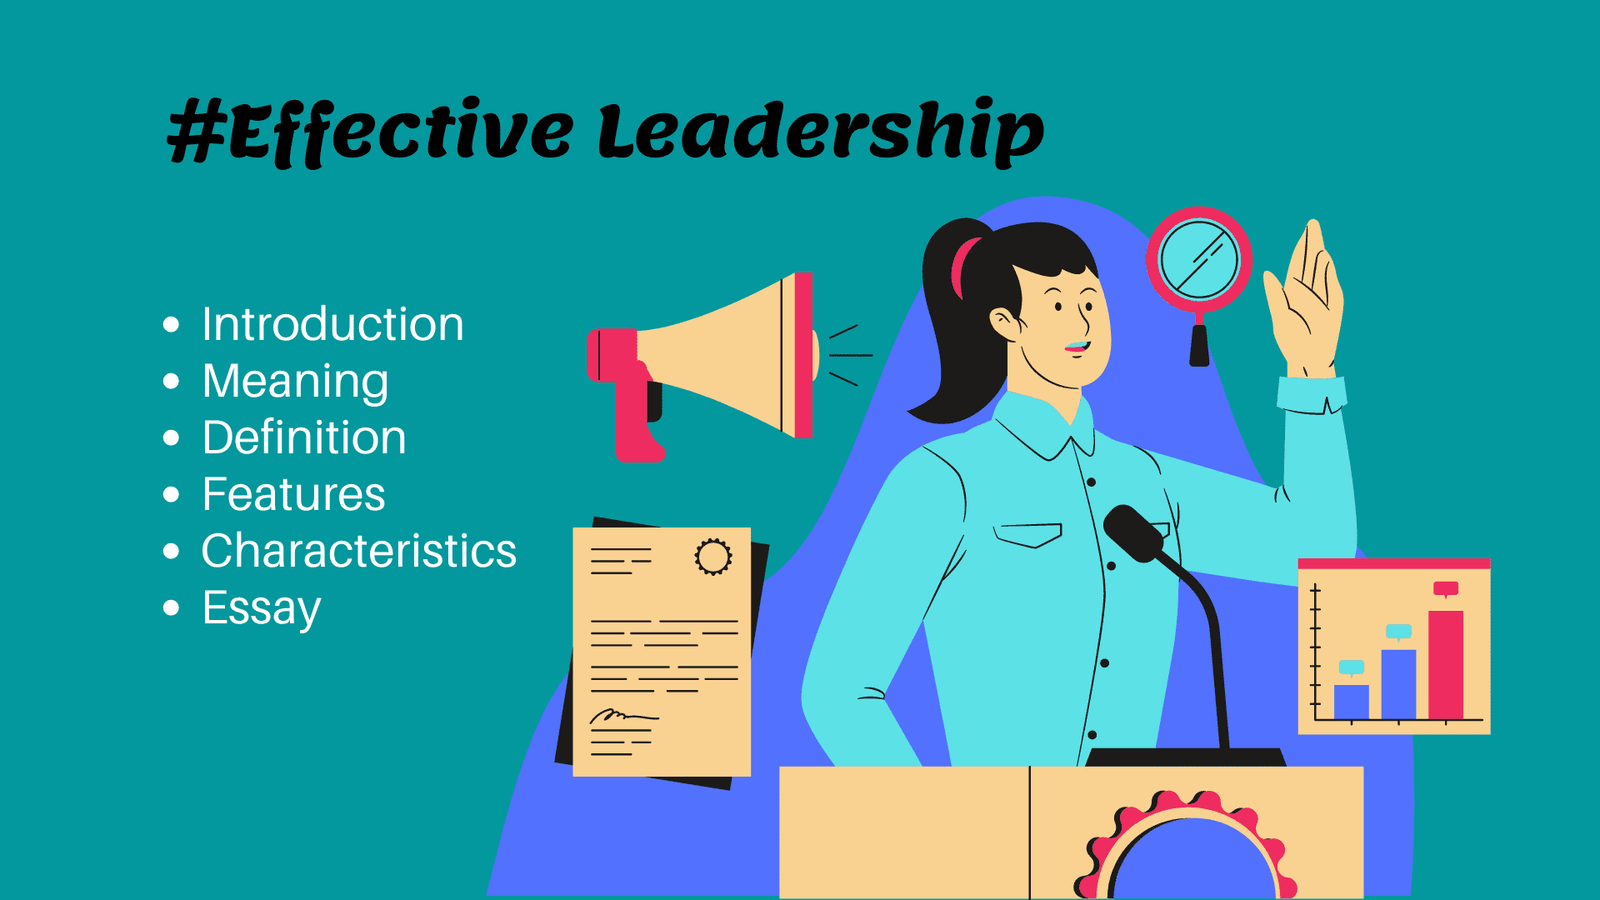 Features and Characteristics of Effective Leadership Image